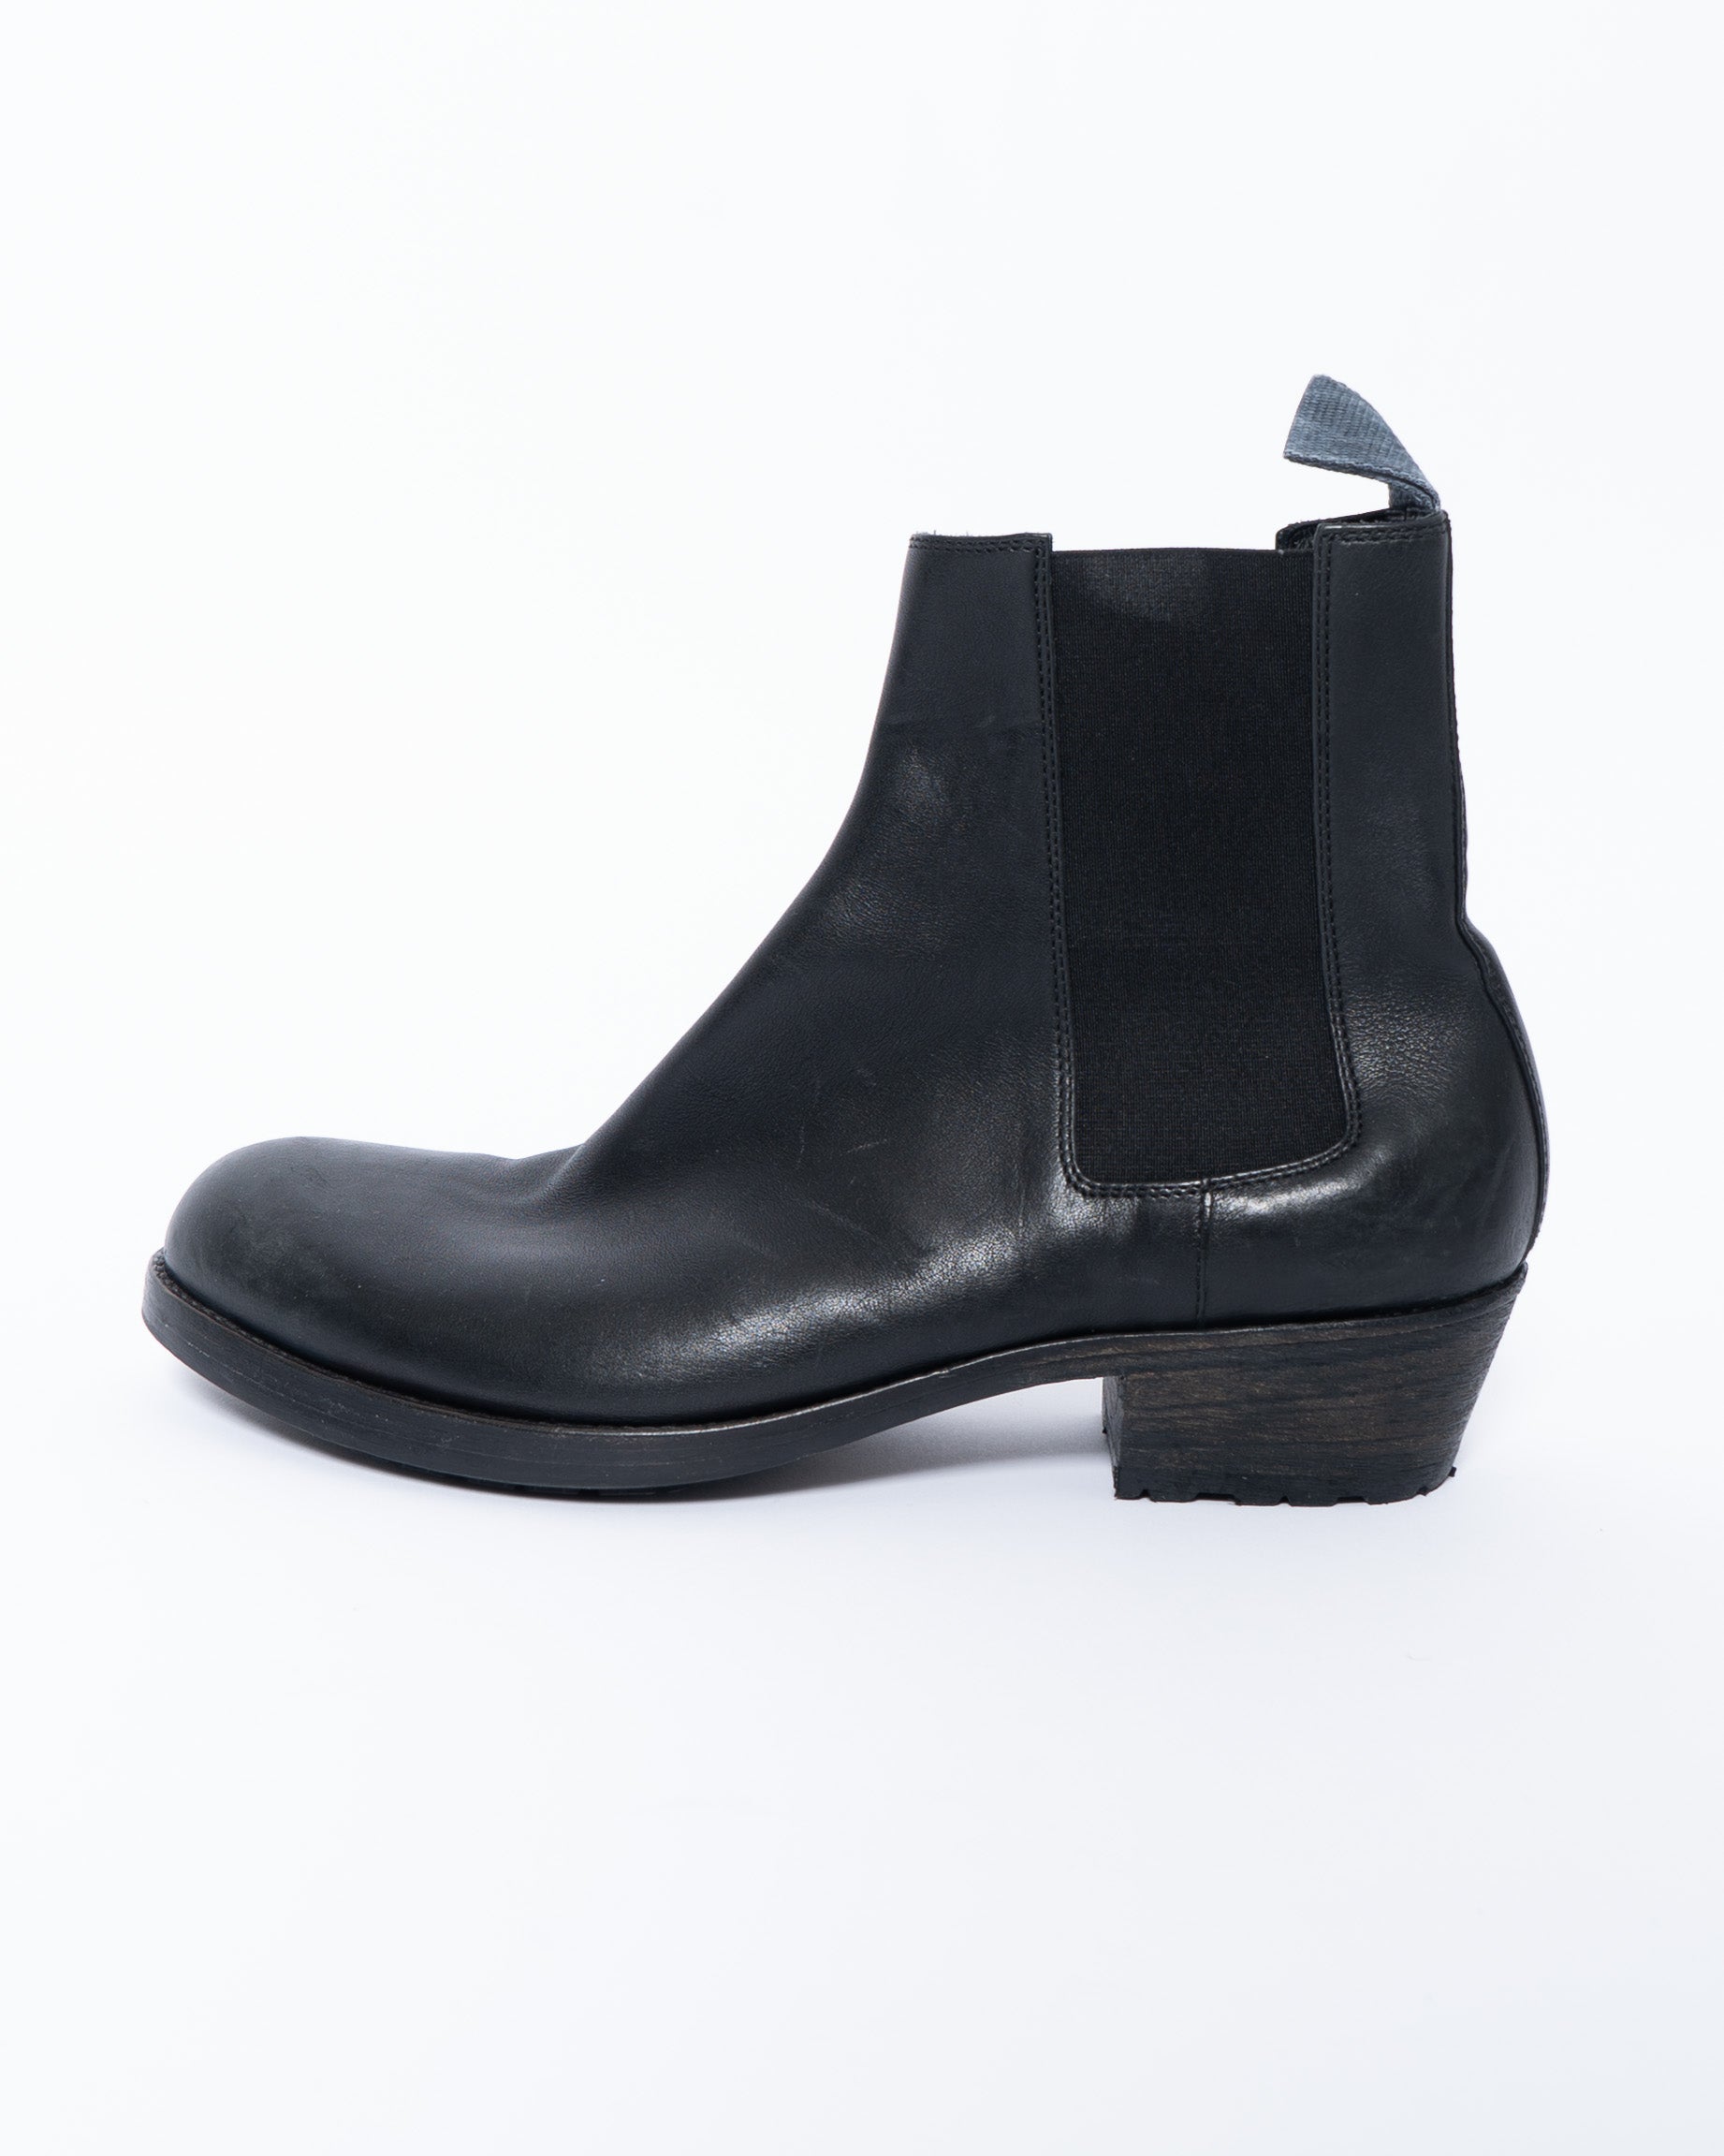 FW18 Chunky Black Leather Chelsea Boots